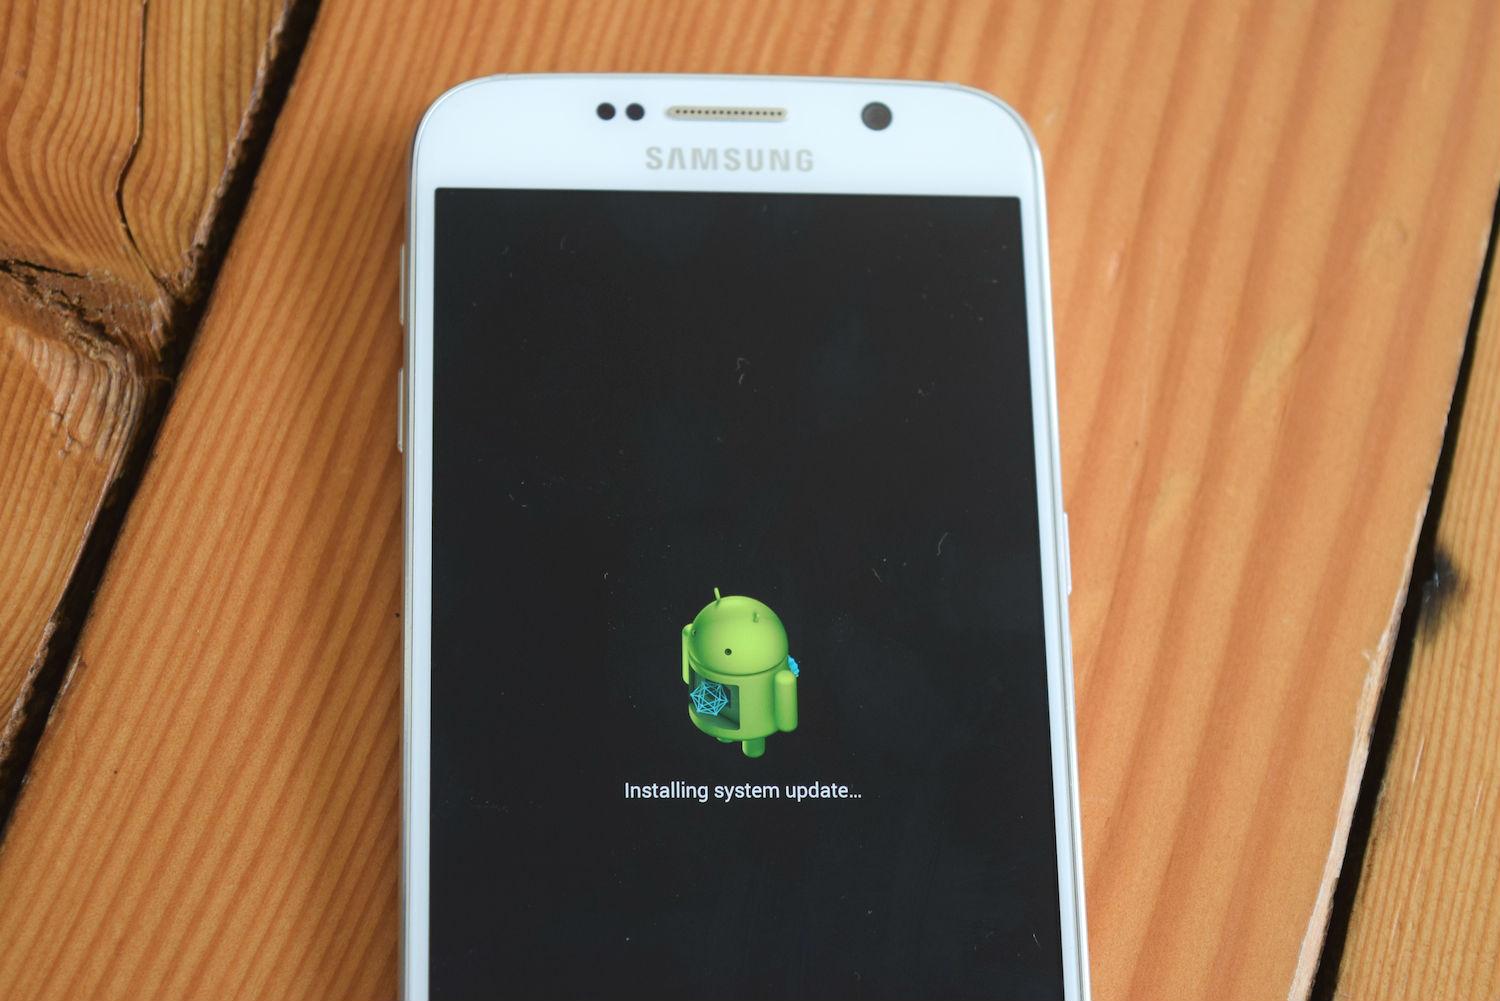  How to factory reset a Galaxy S6 or S6 Edge